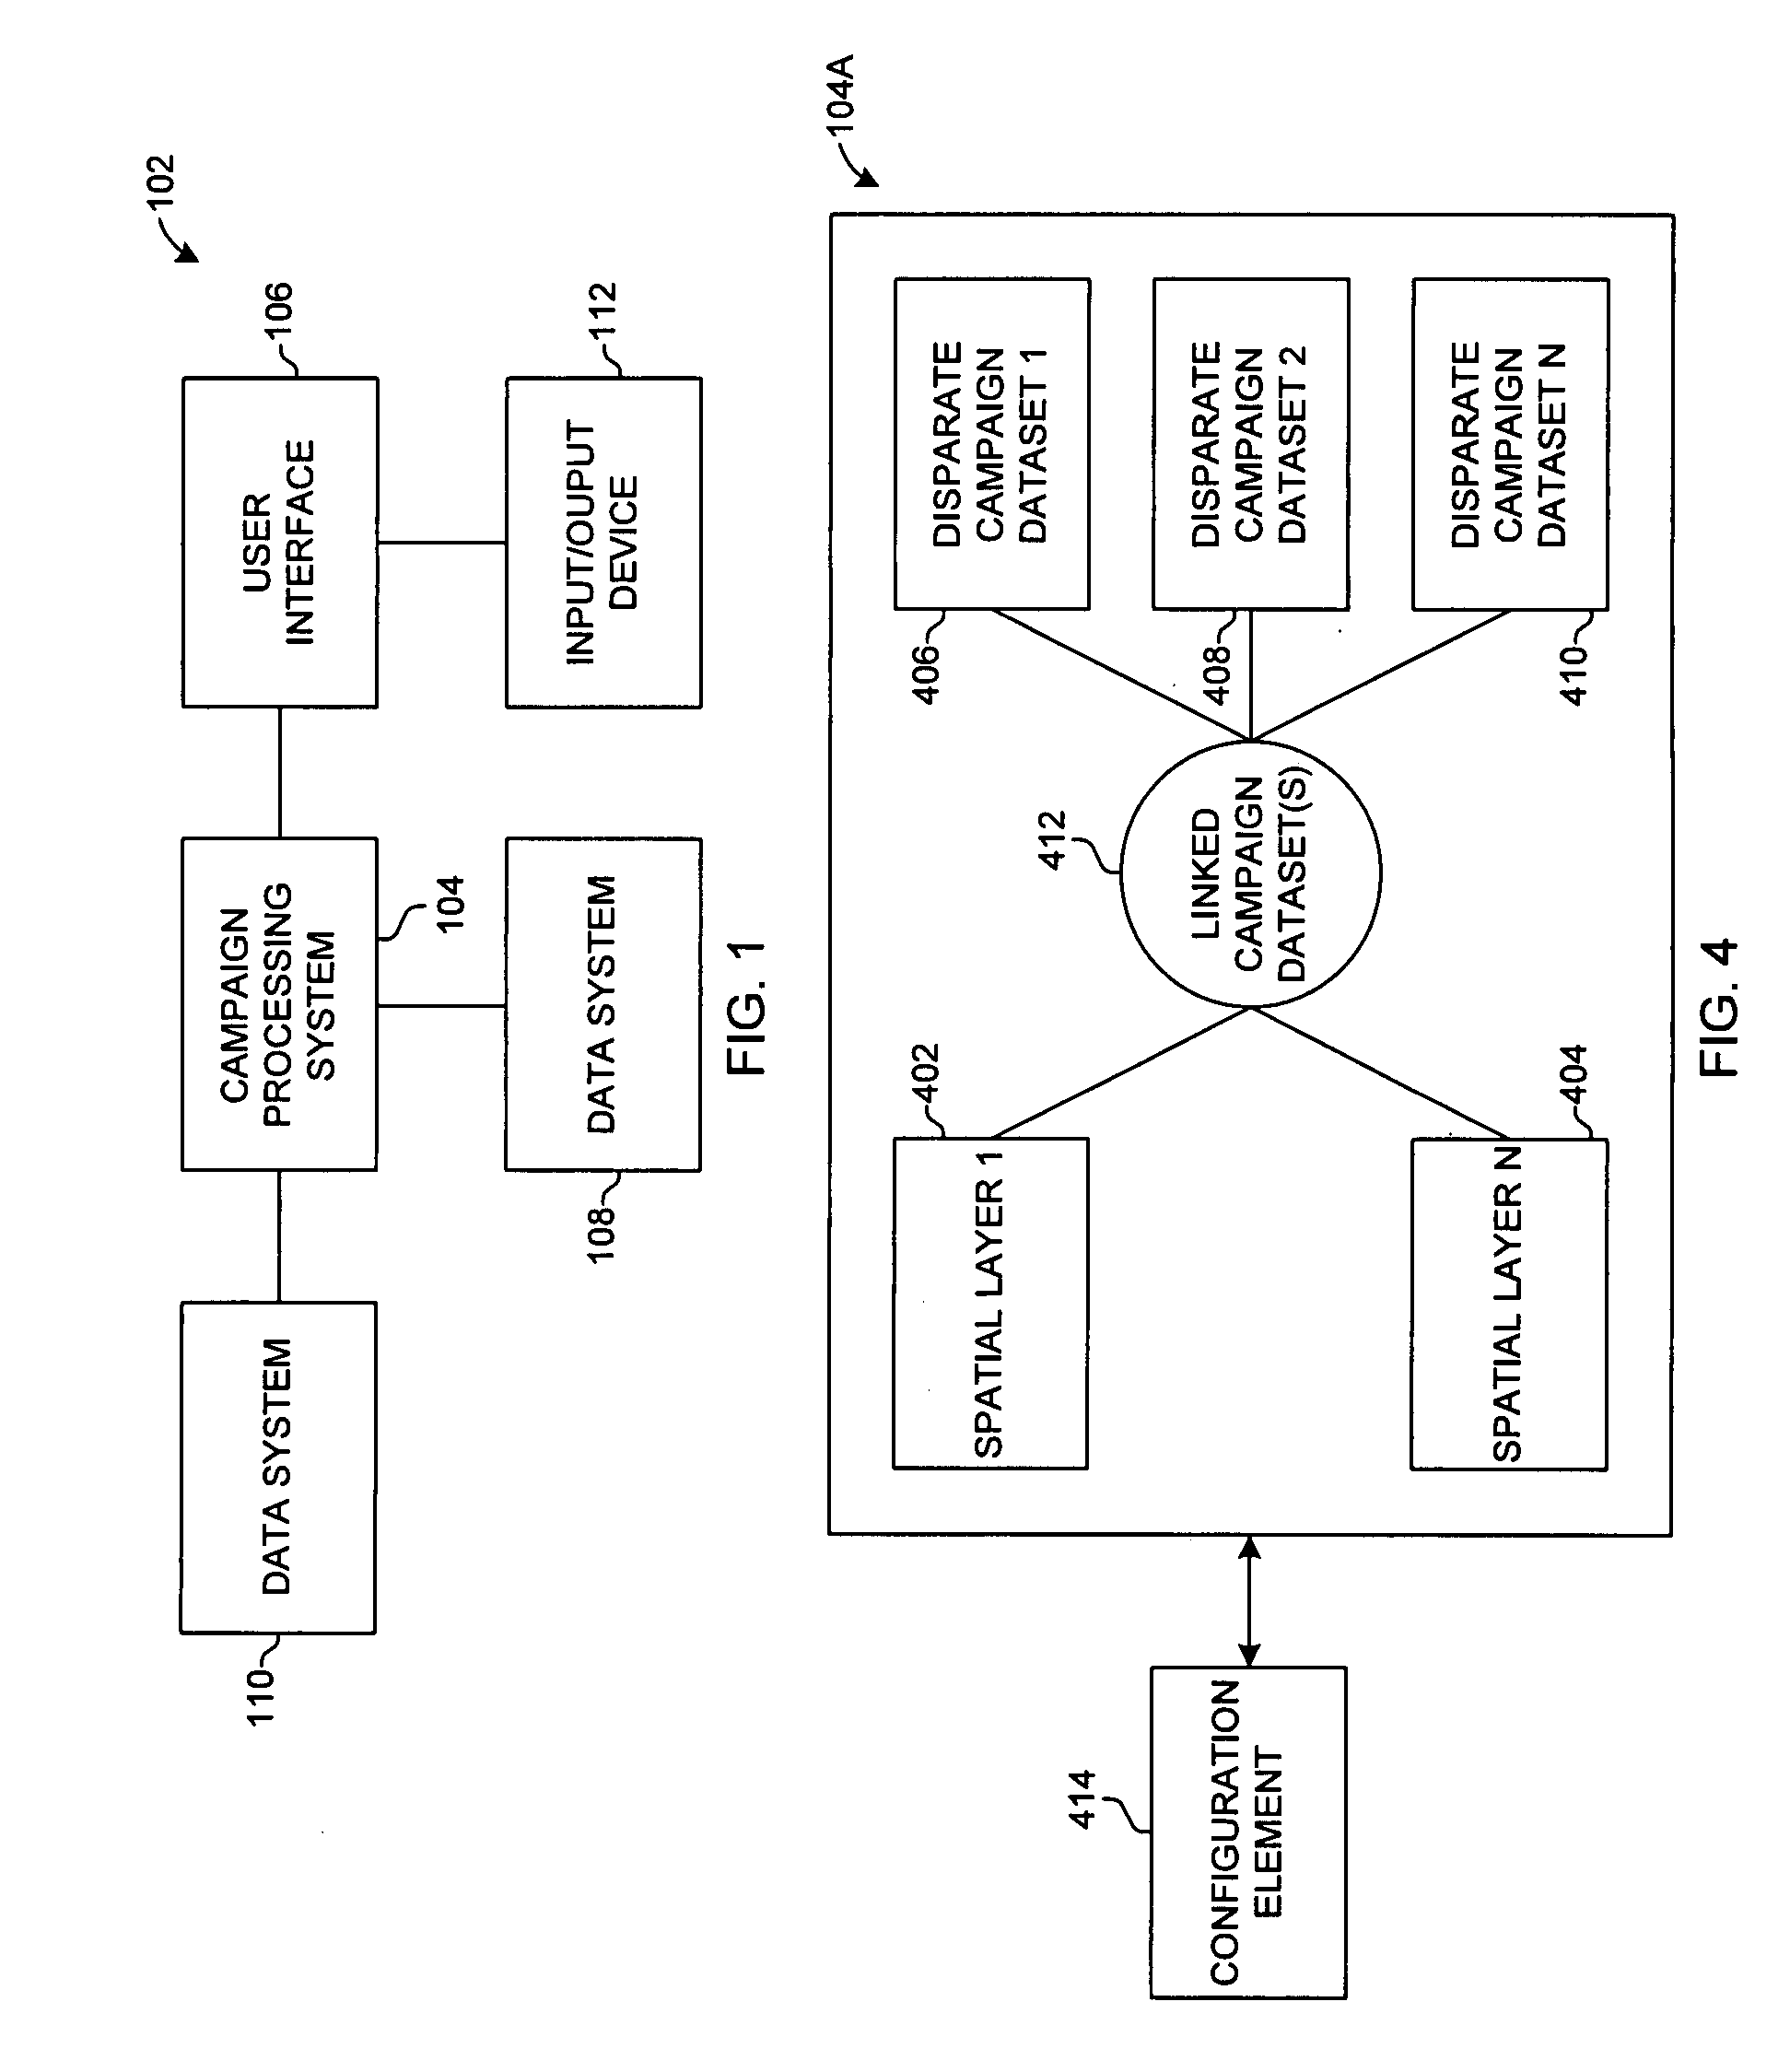 Campaign awareness management systems and methods